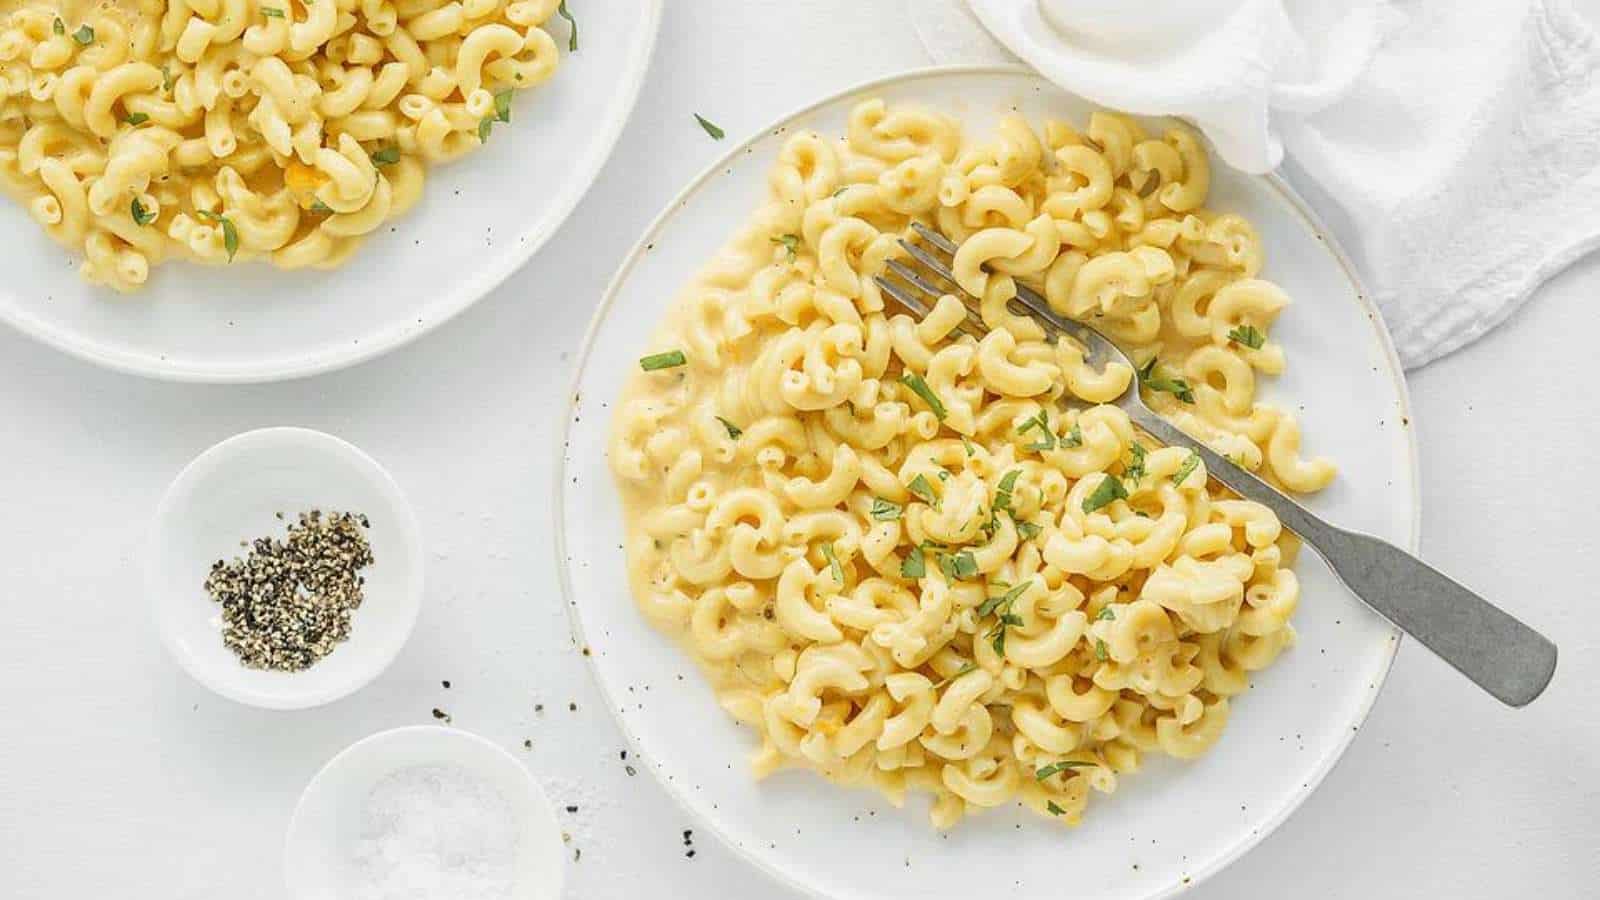 Two plates of macaroni and cheese on a white background.